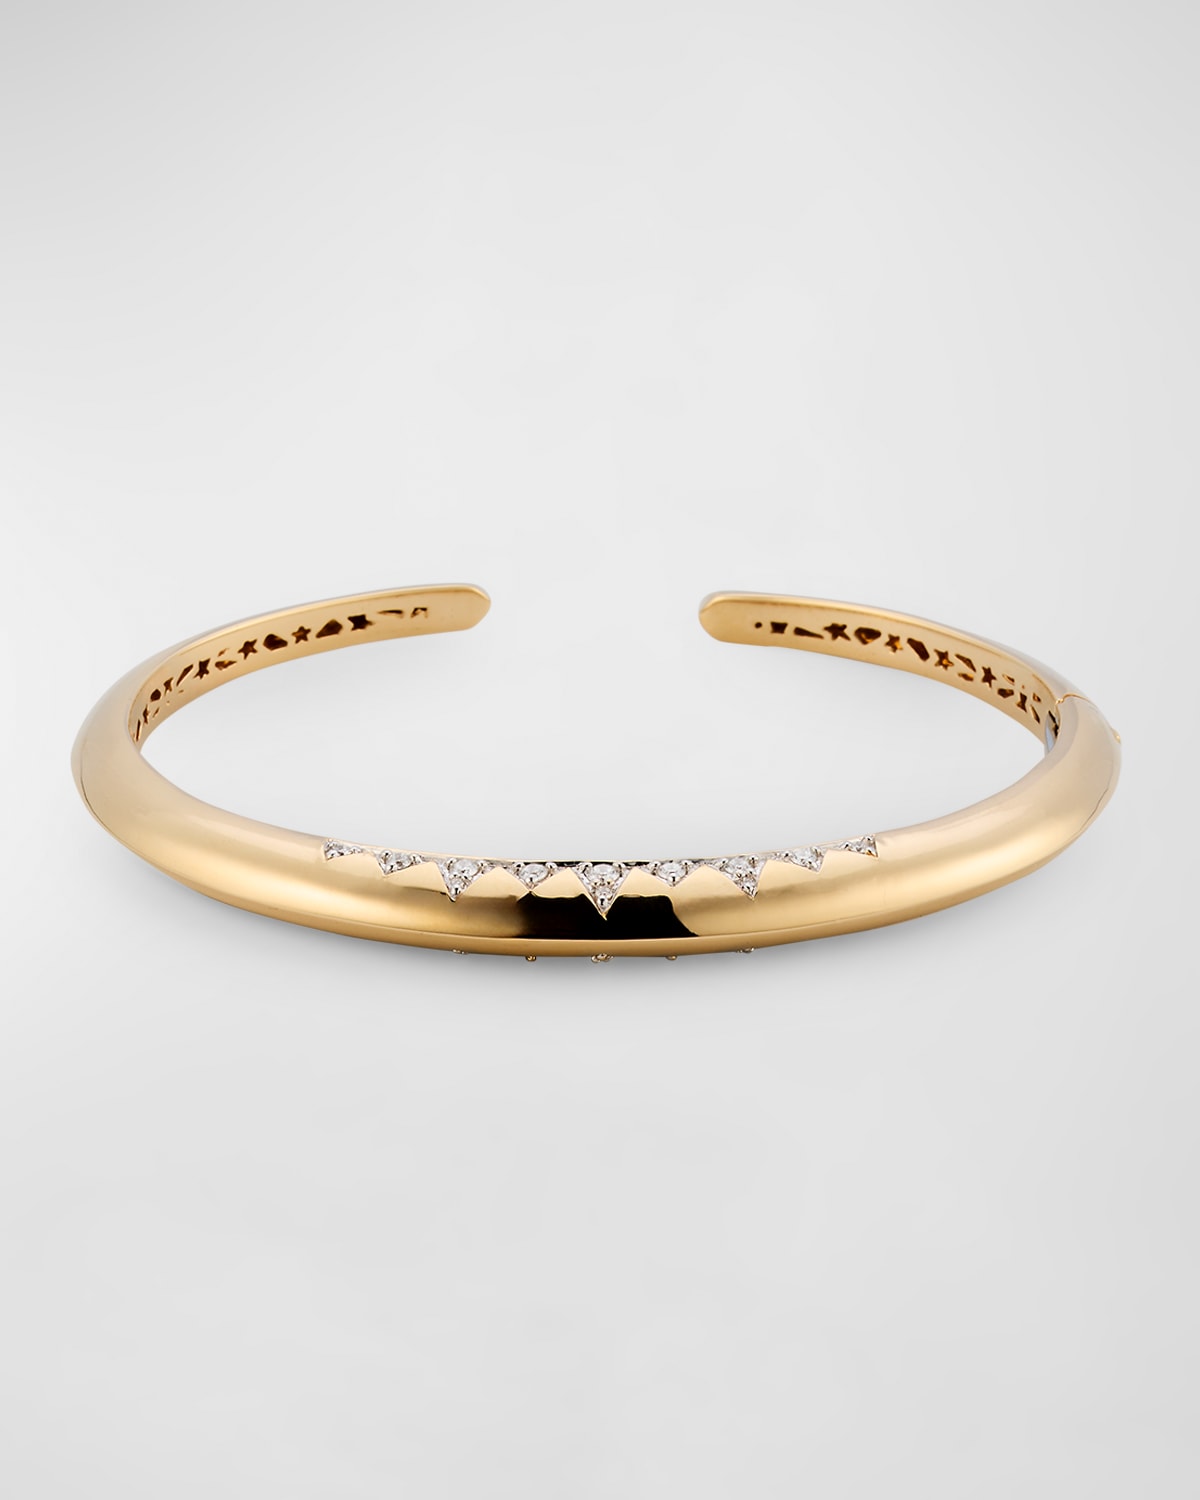 18K Yellow Gold Bangle with White Rhodium over GH-SI Diamonds